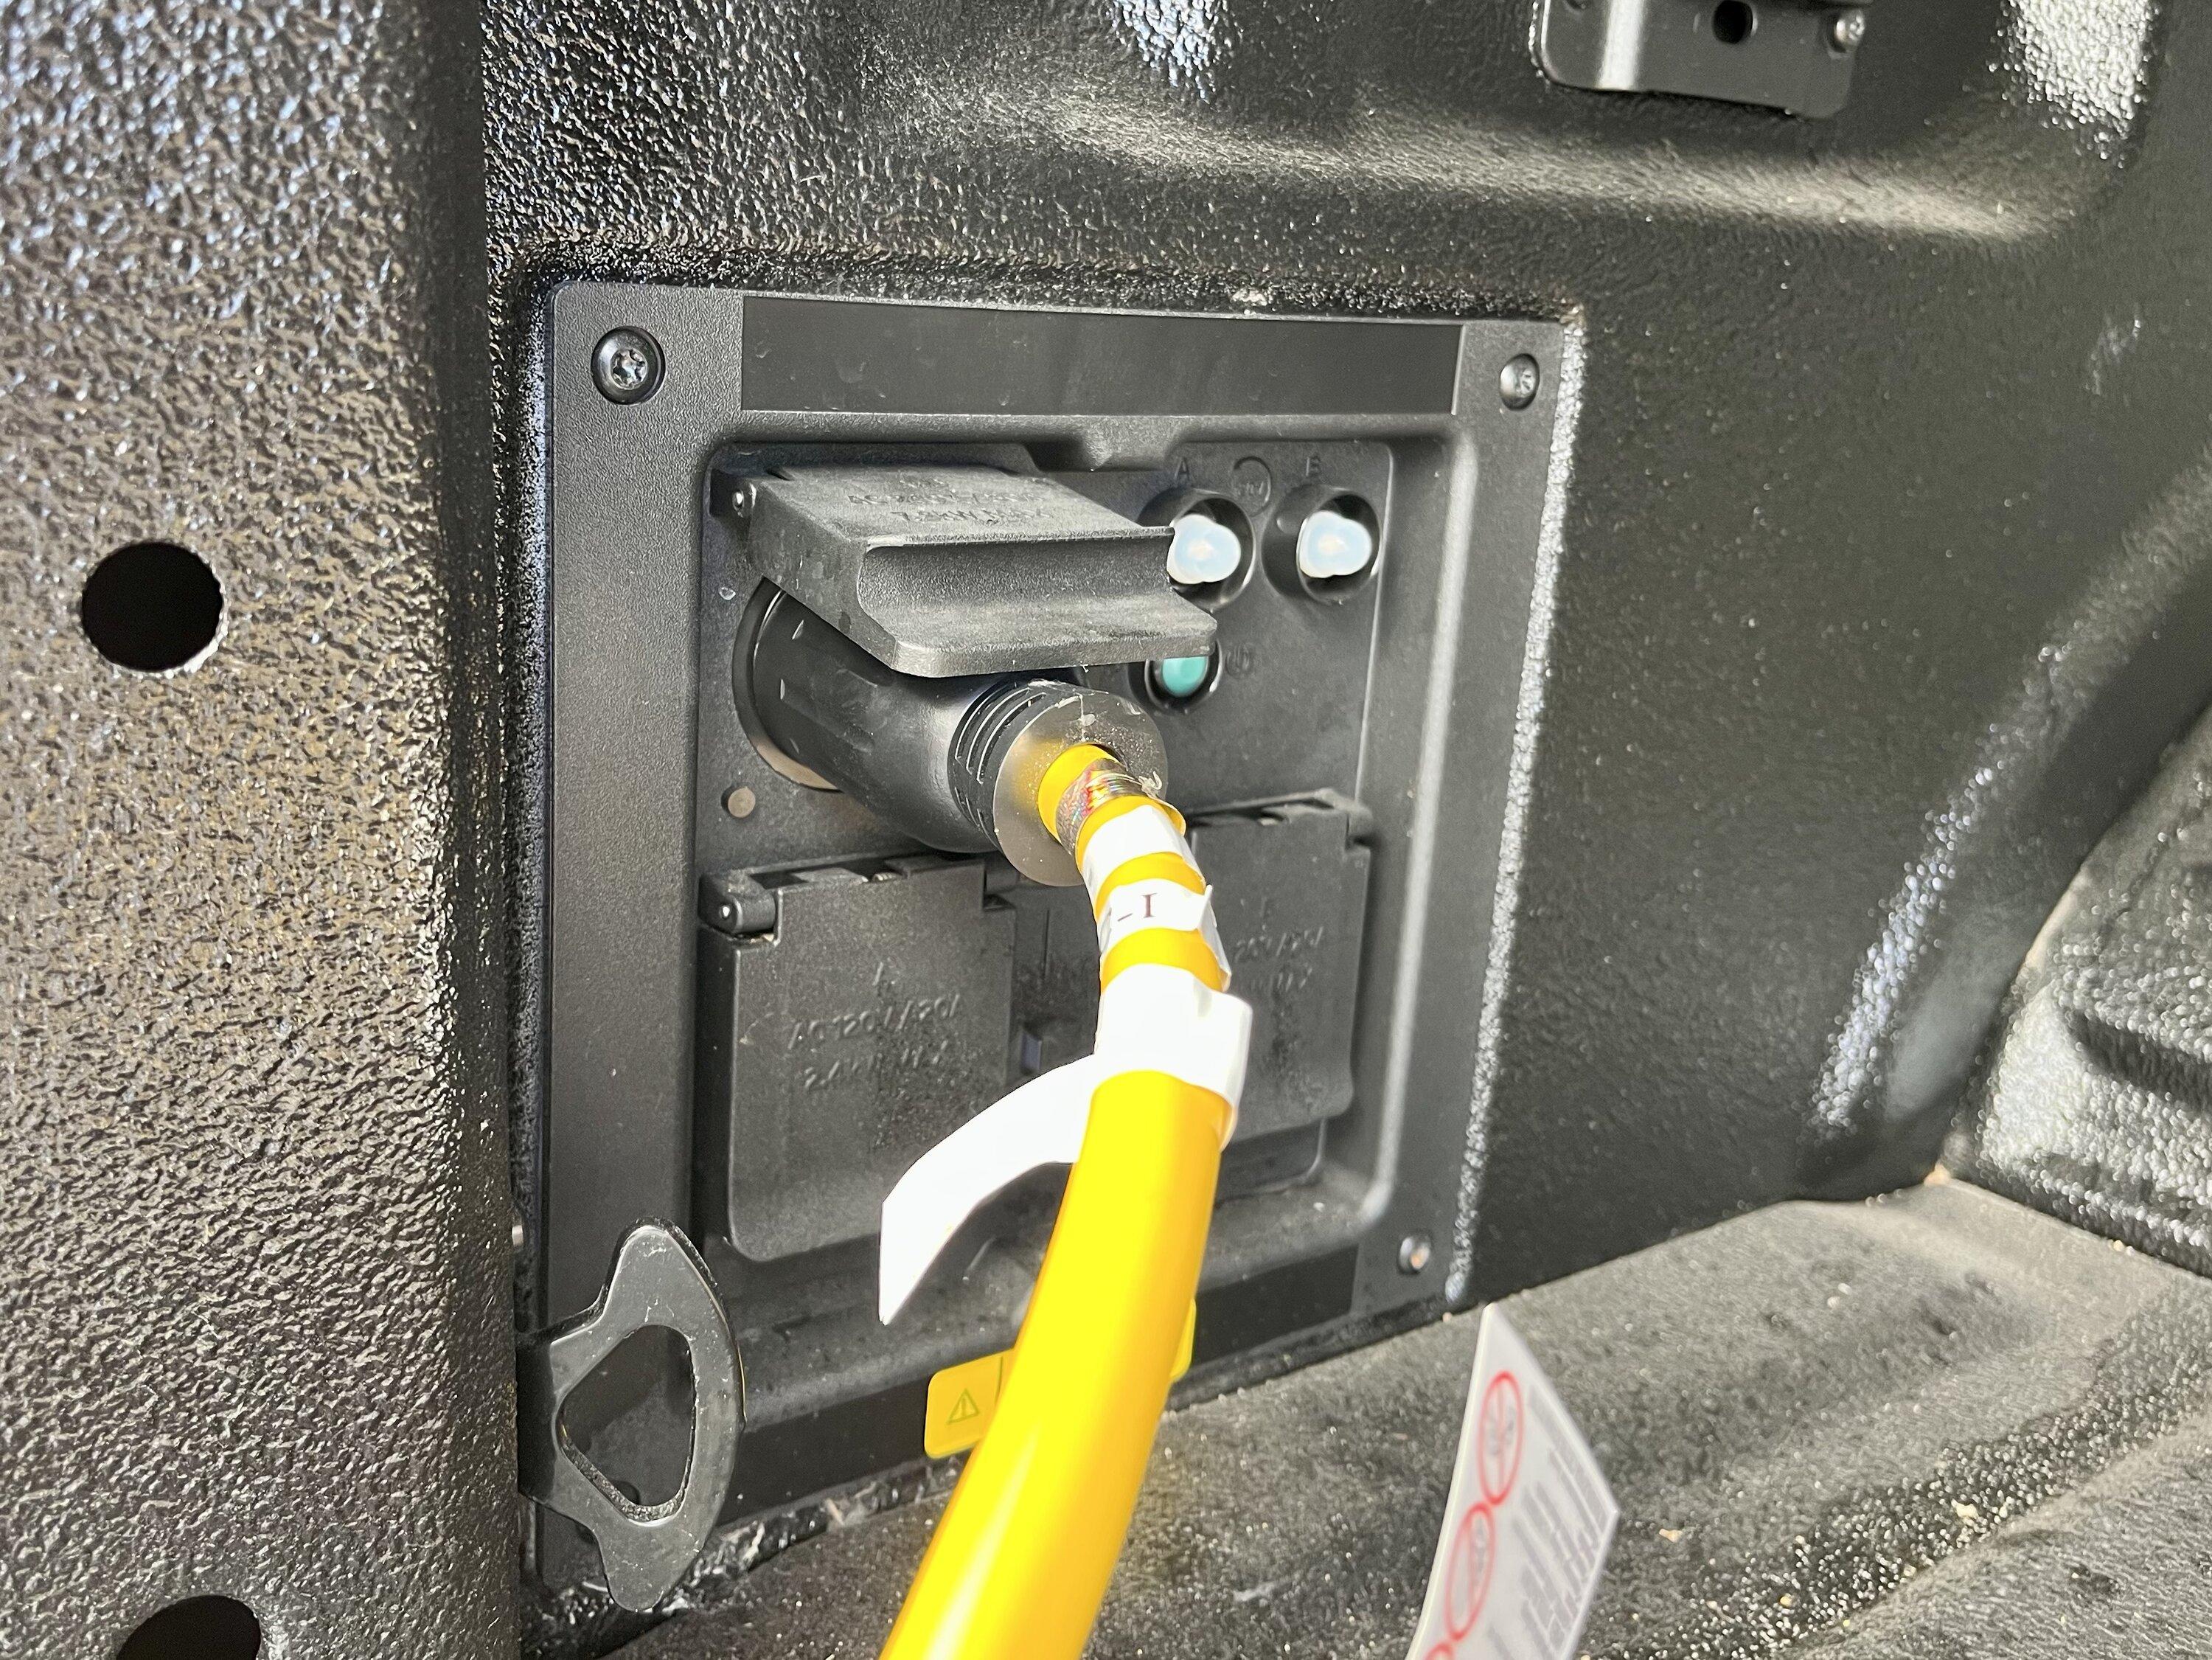 Ford F-150 Lightning PRO POWER OUTLET SUCCESS! Powering My House With Transfer Switch for GFCI Generators AF596667-F15F-4D03-88BC-06403F46ACBC